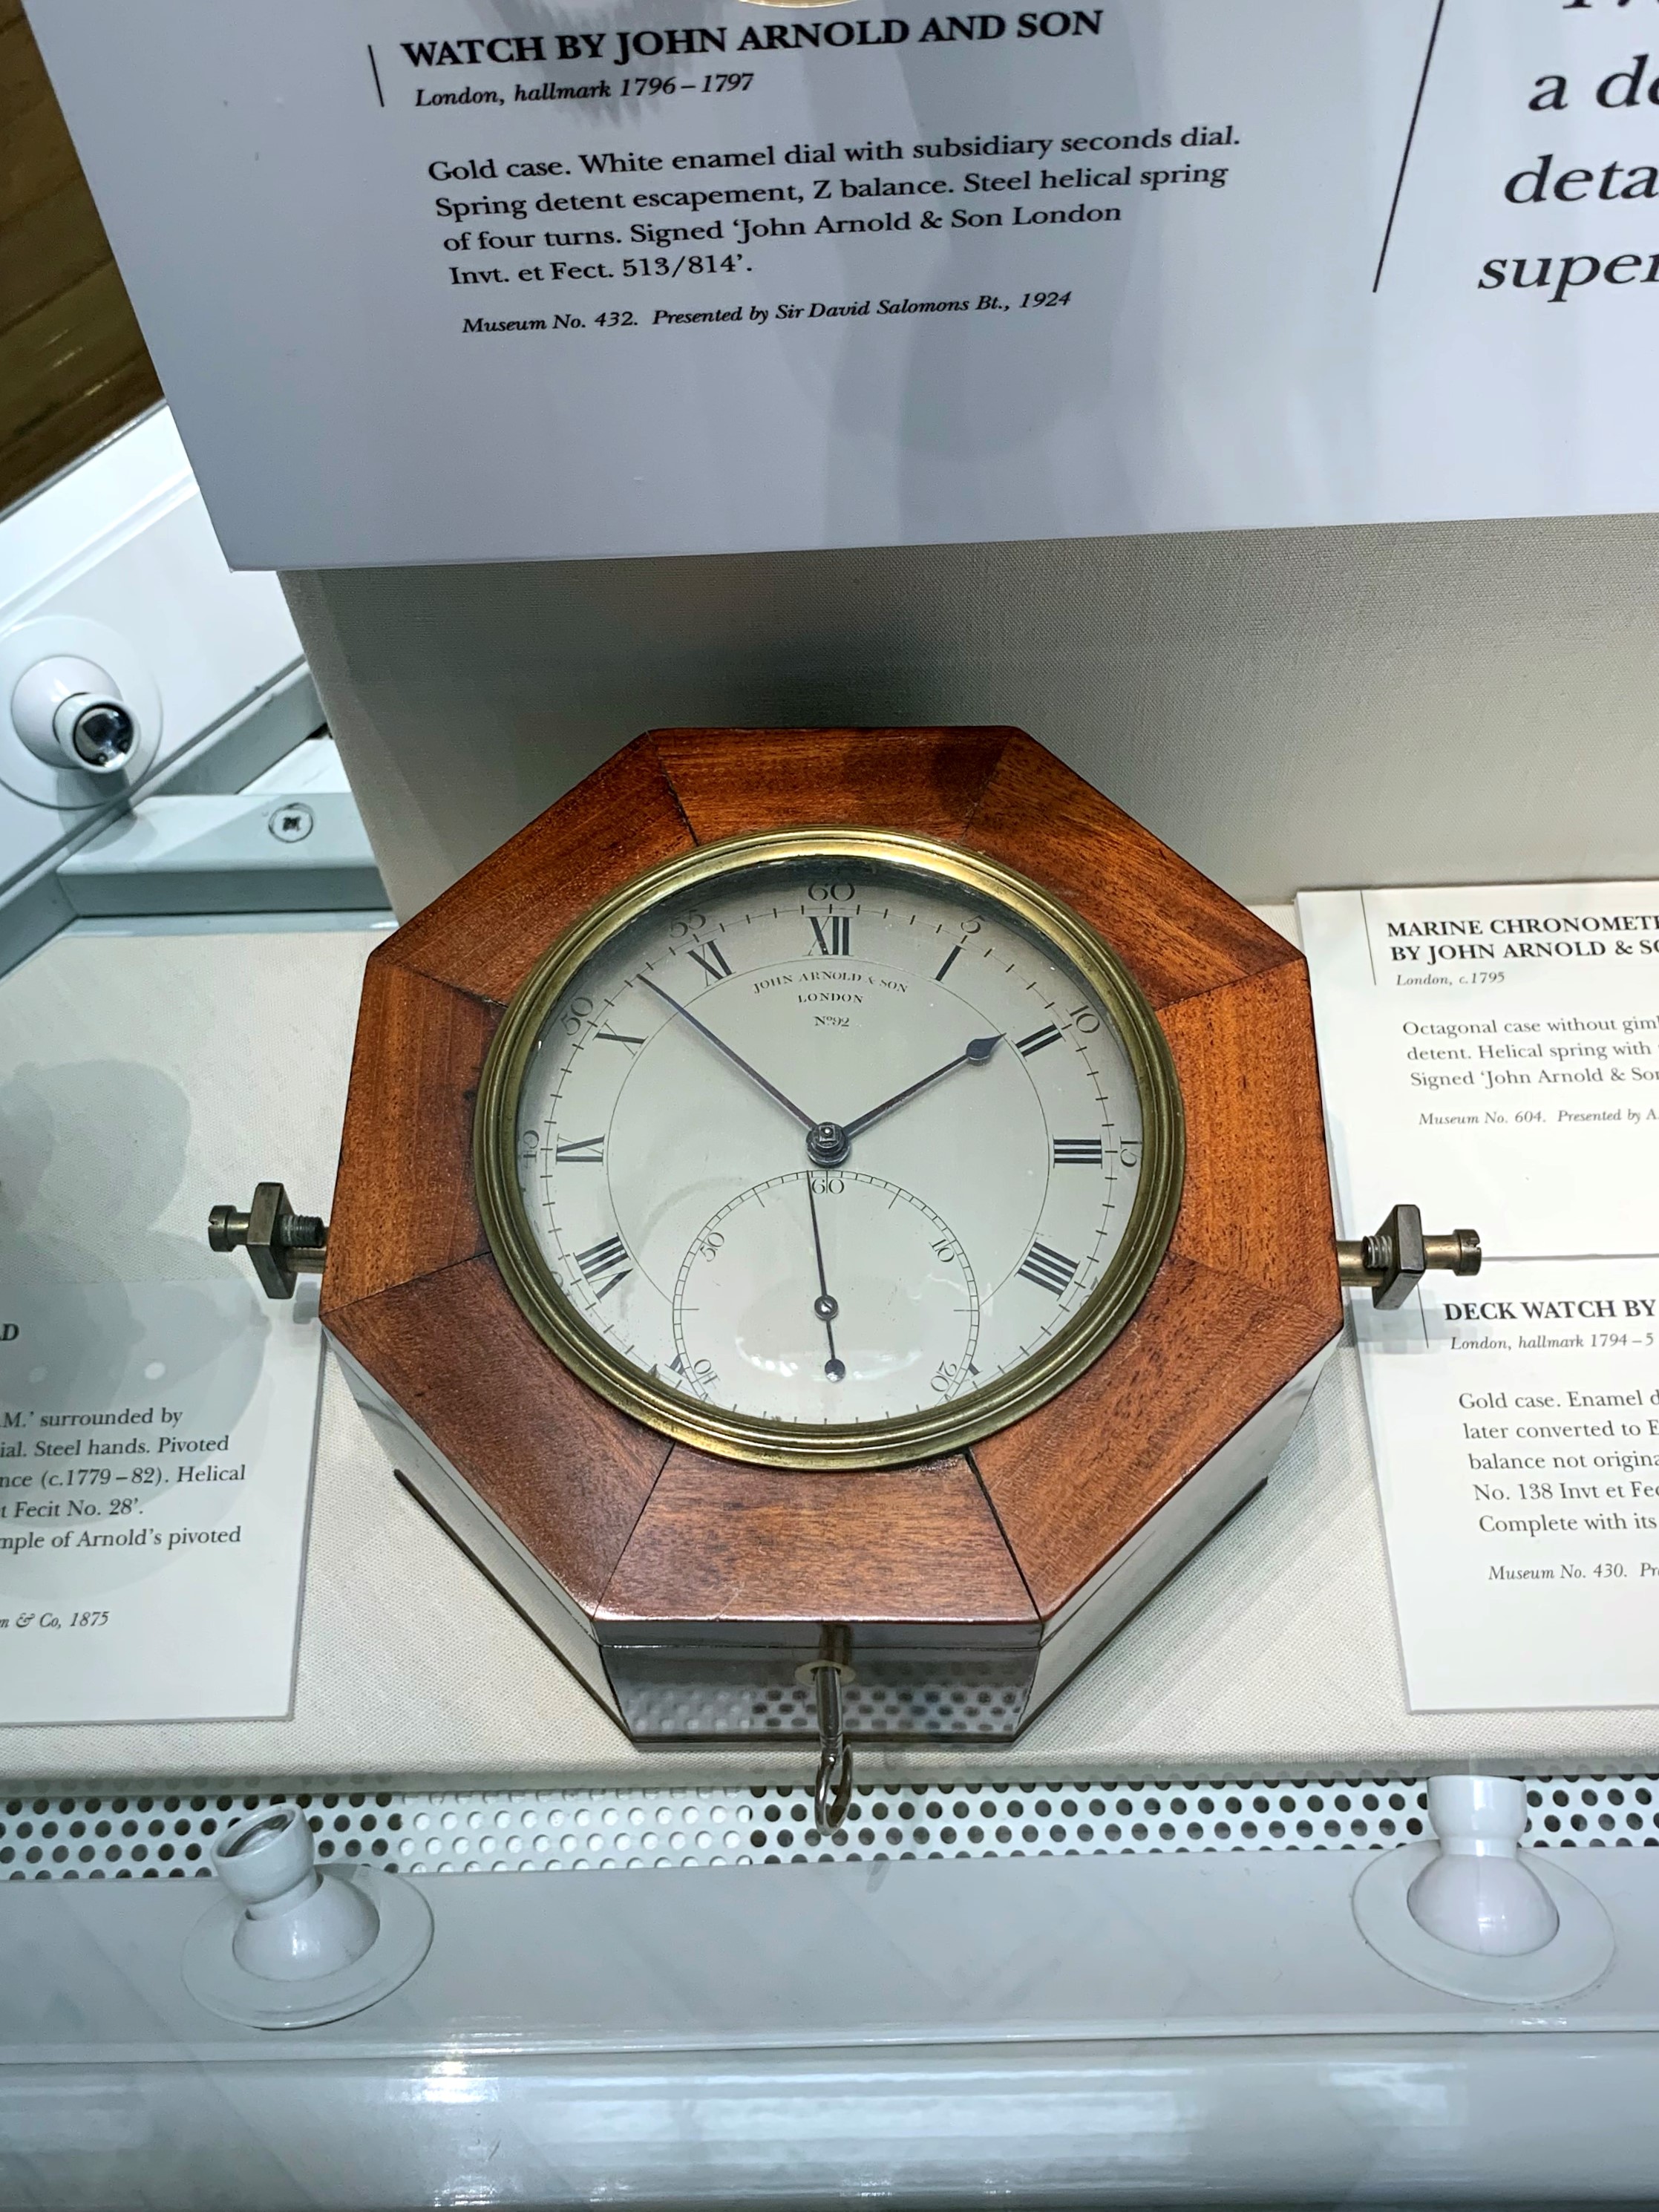 Arnold & Son marine chronometer - one of many at the clockmakers museum, London